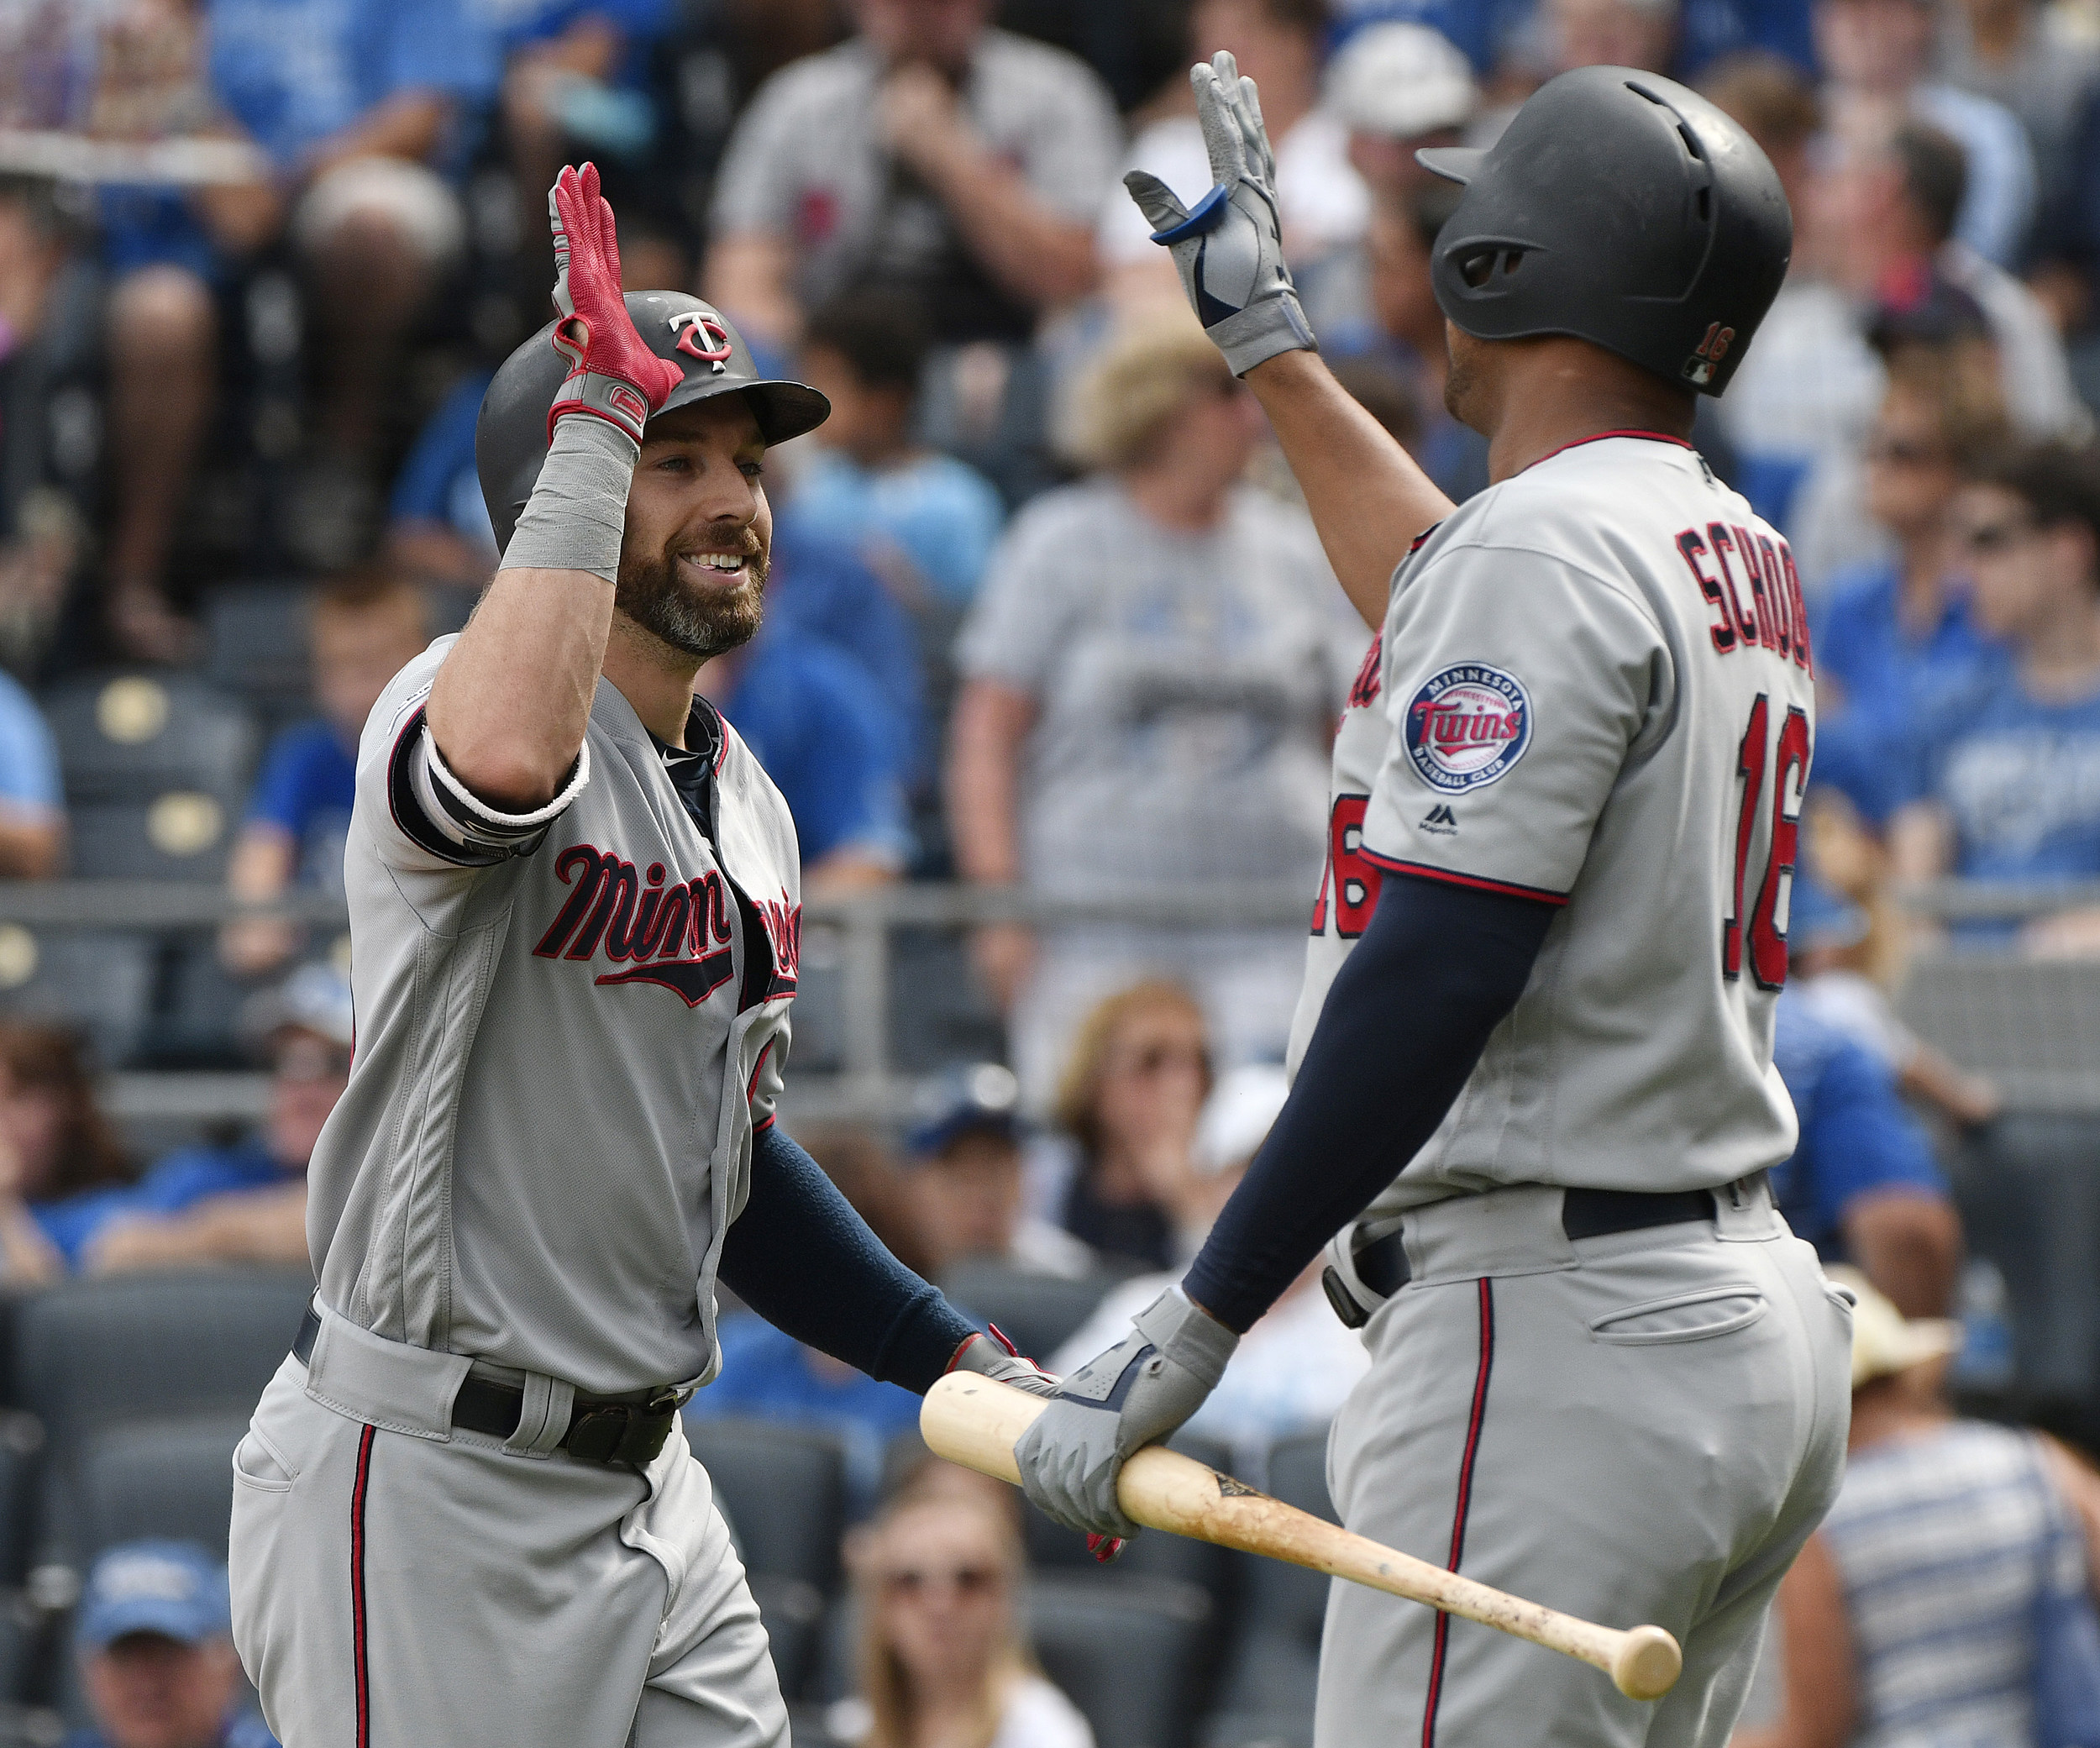 Twins vs. Yankees live stream: What channel game is on, how to